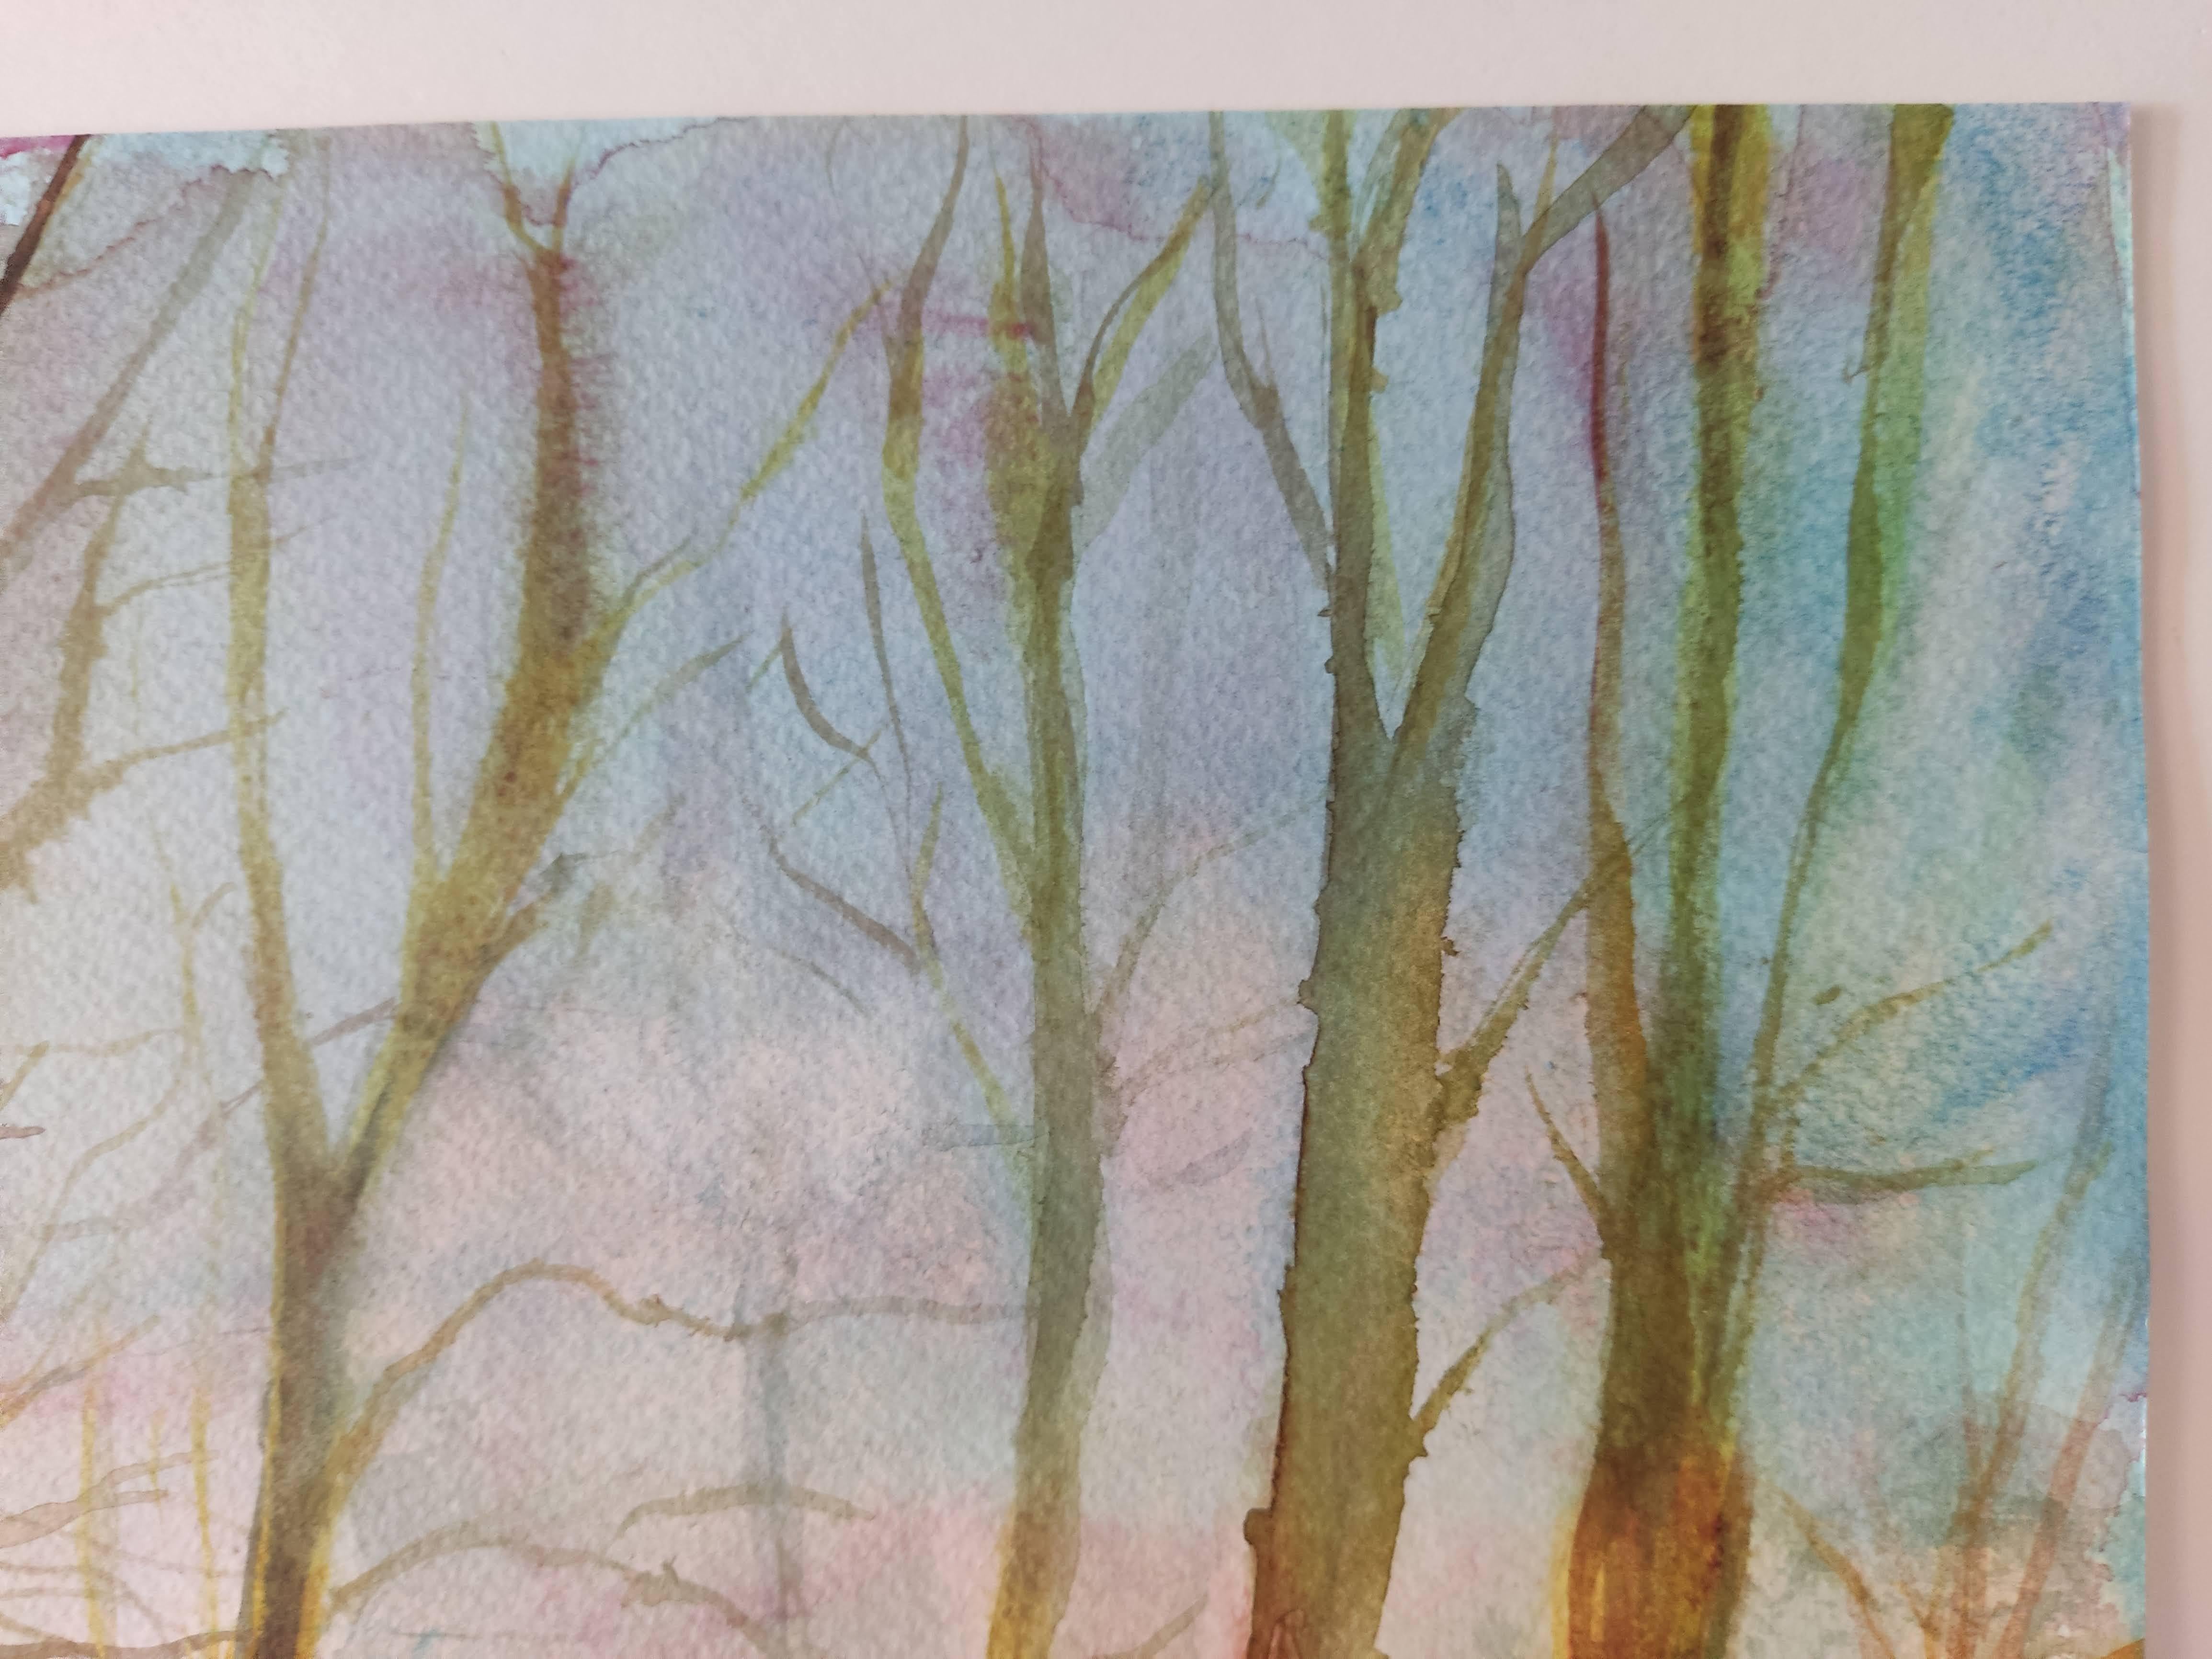 Watercolor on Archival and Heavy paper - Original Watercolor, Light, Trees, France

This is a watercolor inspired by a forest in France, the work is in very good condition and is signed lower left 